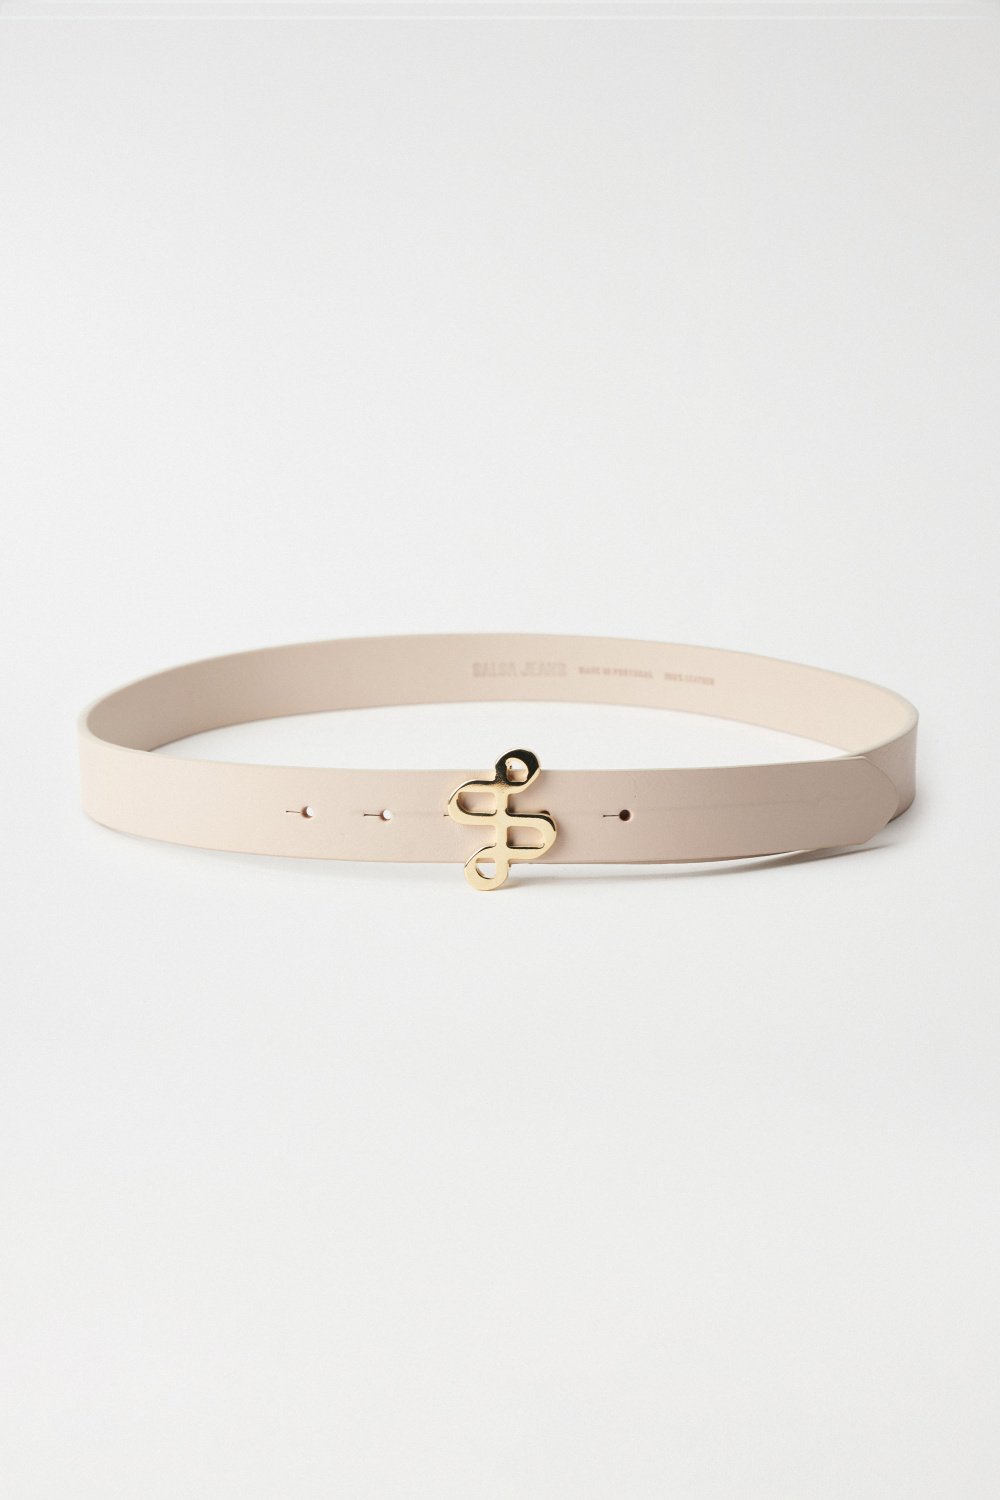 LEATHER BELT WITH GOLD BRANDING ON THE BUCKLE - Salsa